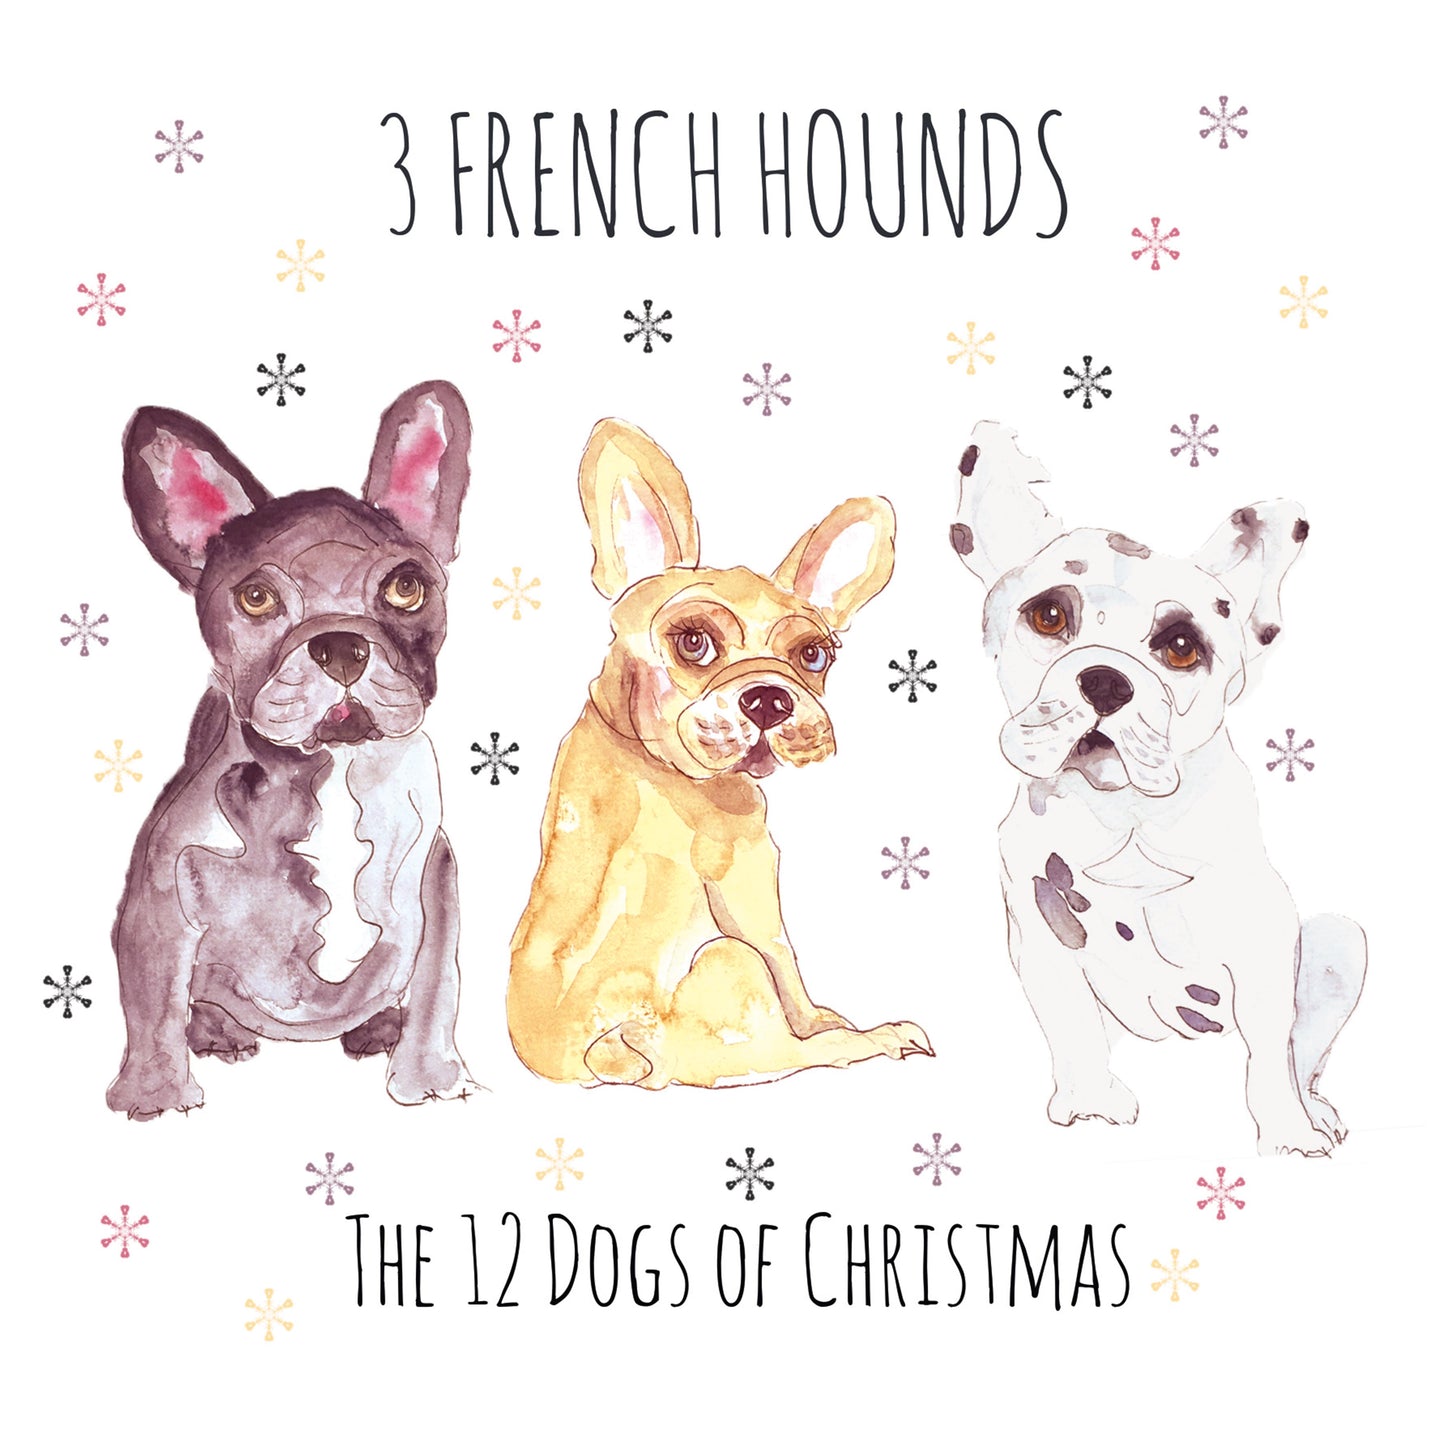 3 French Hounds - Greeting Card